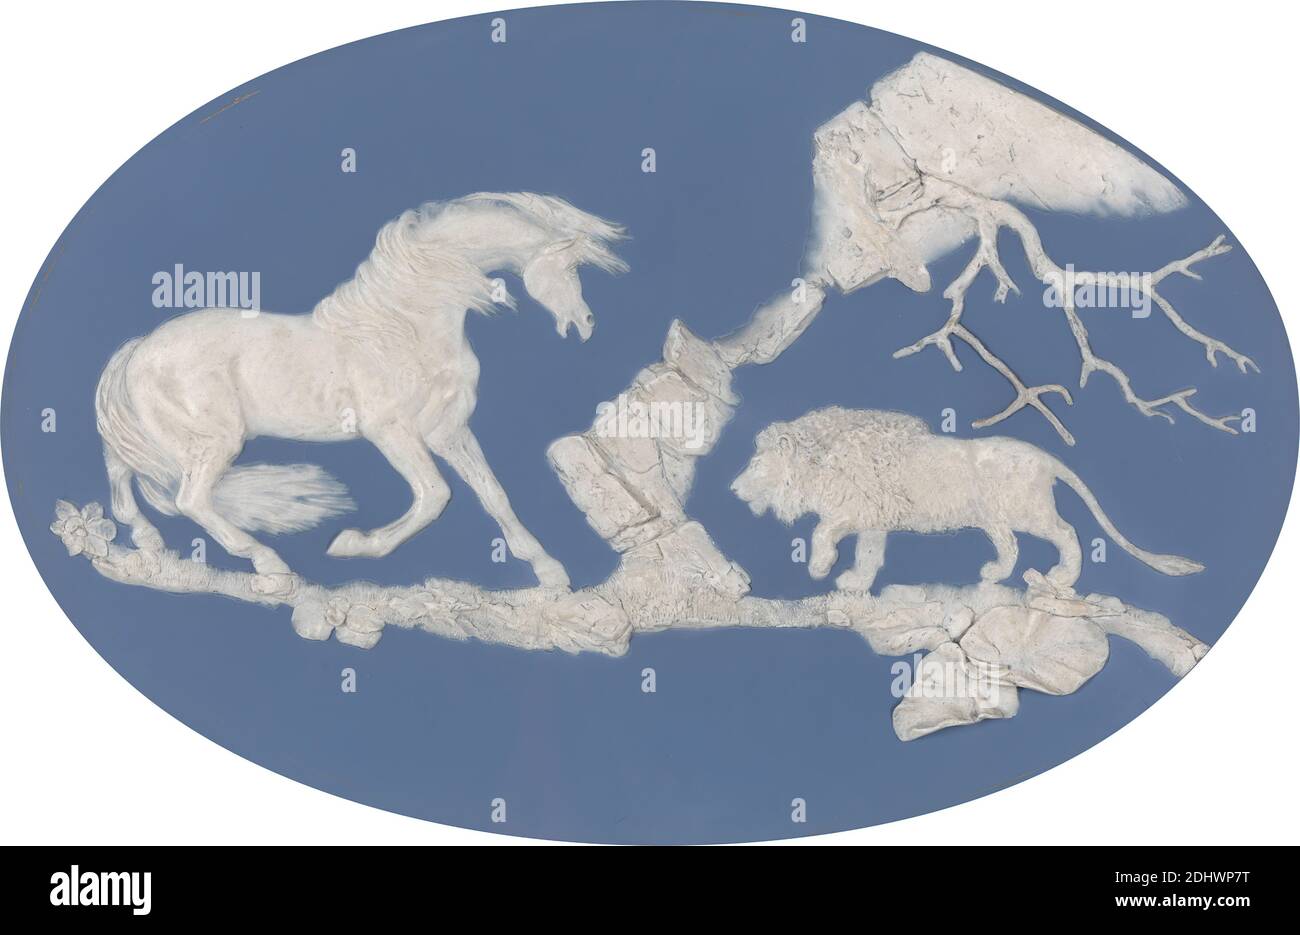 Horse Frightened by a Lion (Episode A), Josiah Wedgwood, 1730–1795, British, and Thomas Bentley, 1731–1780, British, after George Stubbs, 1724–1806, British, modeled 1780, Solid blue jasper with white relief, shallow oval, Image: 10 × 16 inches (25.4 × 40.6 cm) and Overall: 15 × 20 1/2 × 2 3/4 inches (38.1 × 52.1 × 7 cm), animal art, blue, fear, horse (animal), lion, oval, rocks (landforms), white Stock Photo